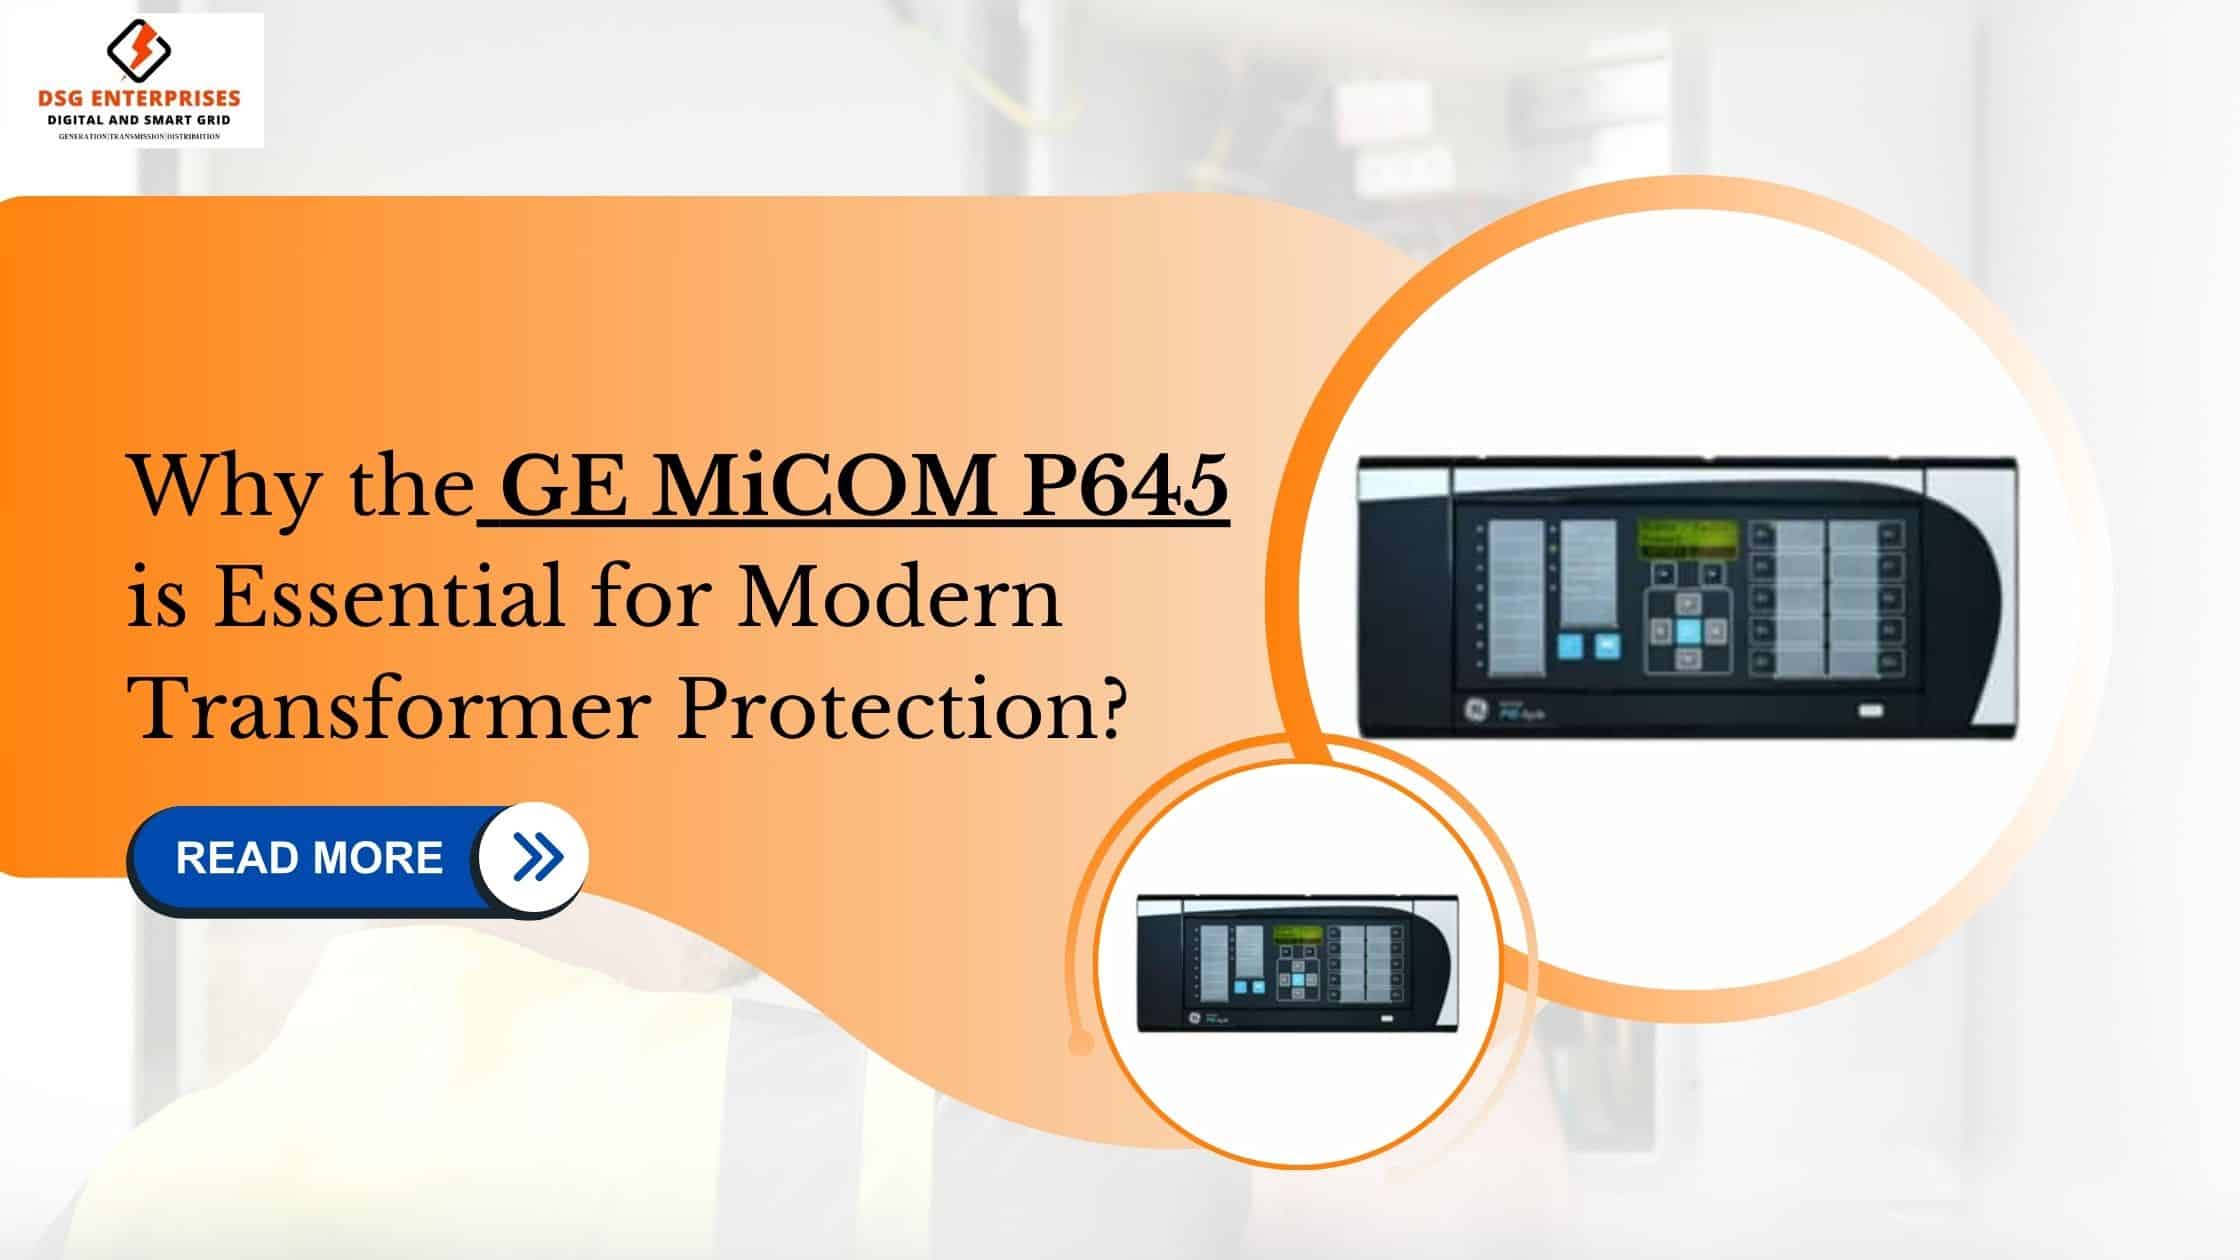 You are currently viewing Why the GE MiCOM P645 is Essential for Modern Transformer Protection.